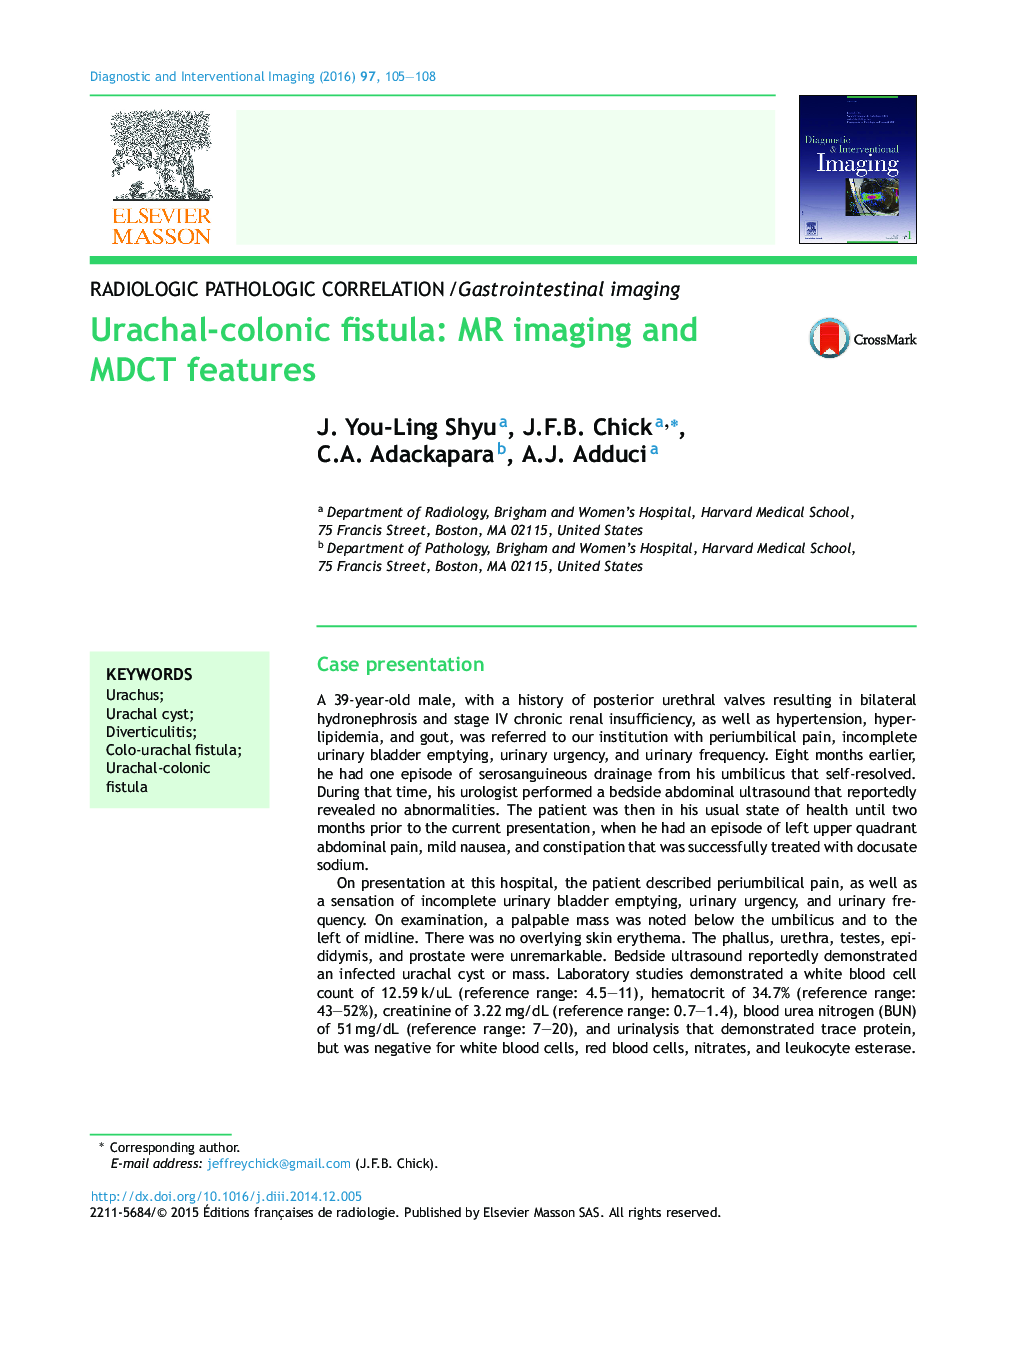 Urachal-colonic fistula: MR imaging and MDCT features